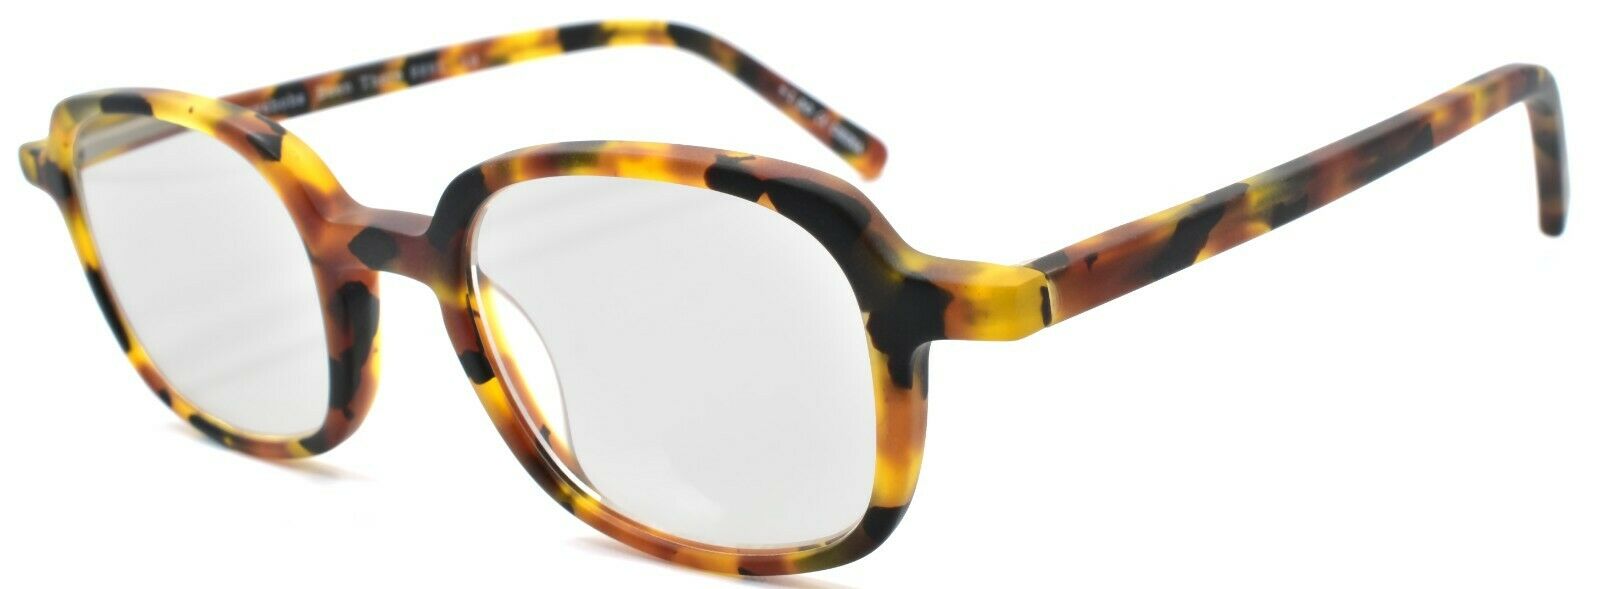 1-Eyebobs Been There 2291 19 Unisex Reading Glasses Tortoise +2.00-842754103374-IKSpecs